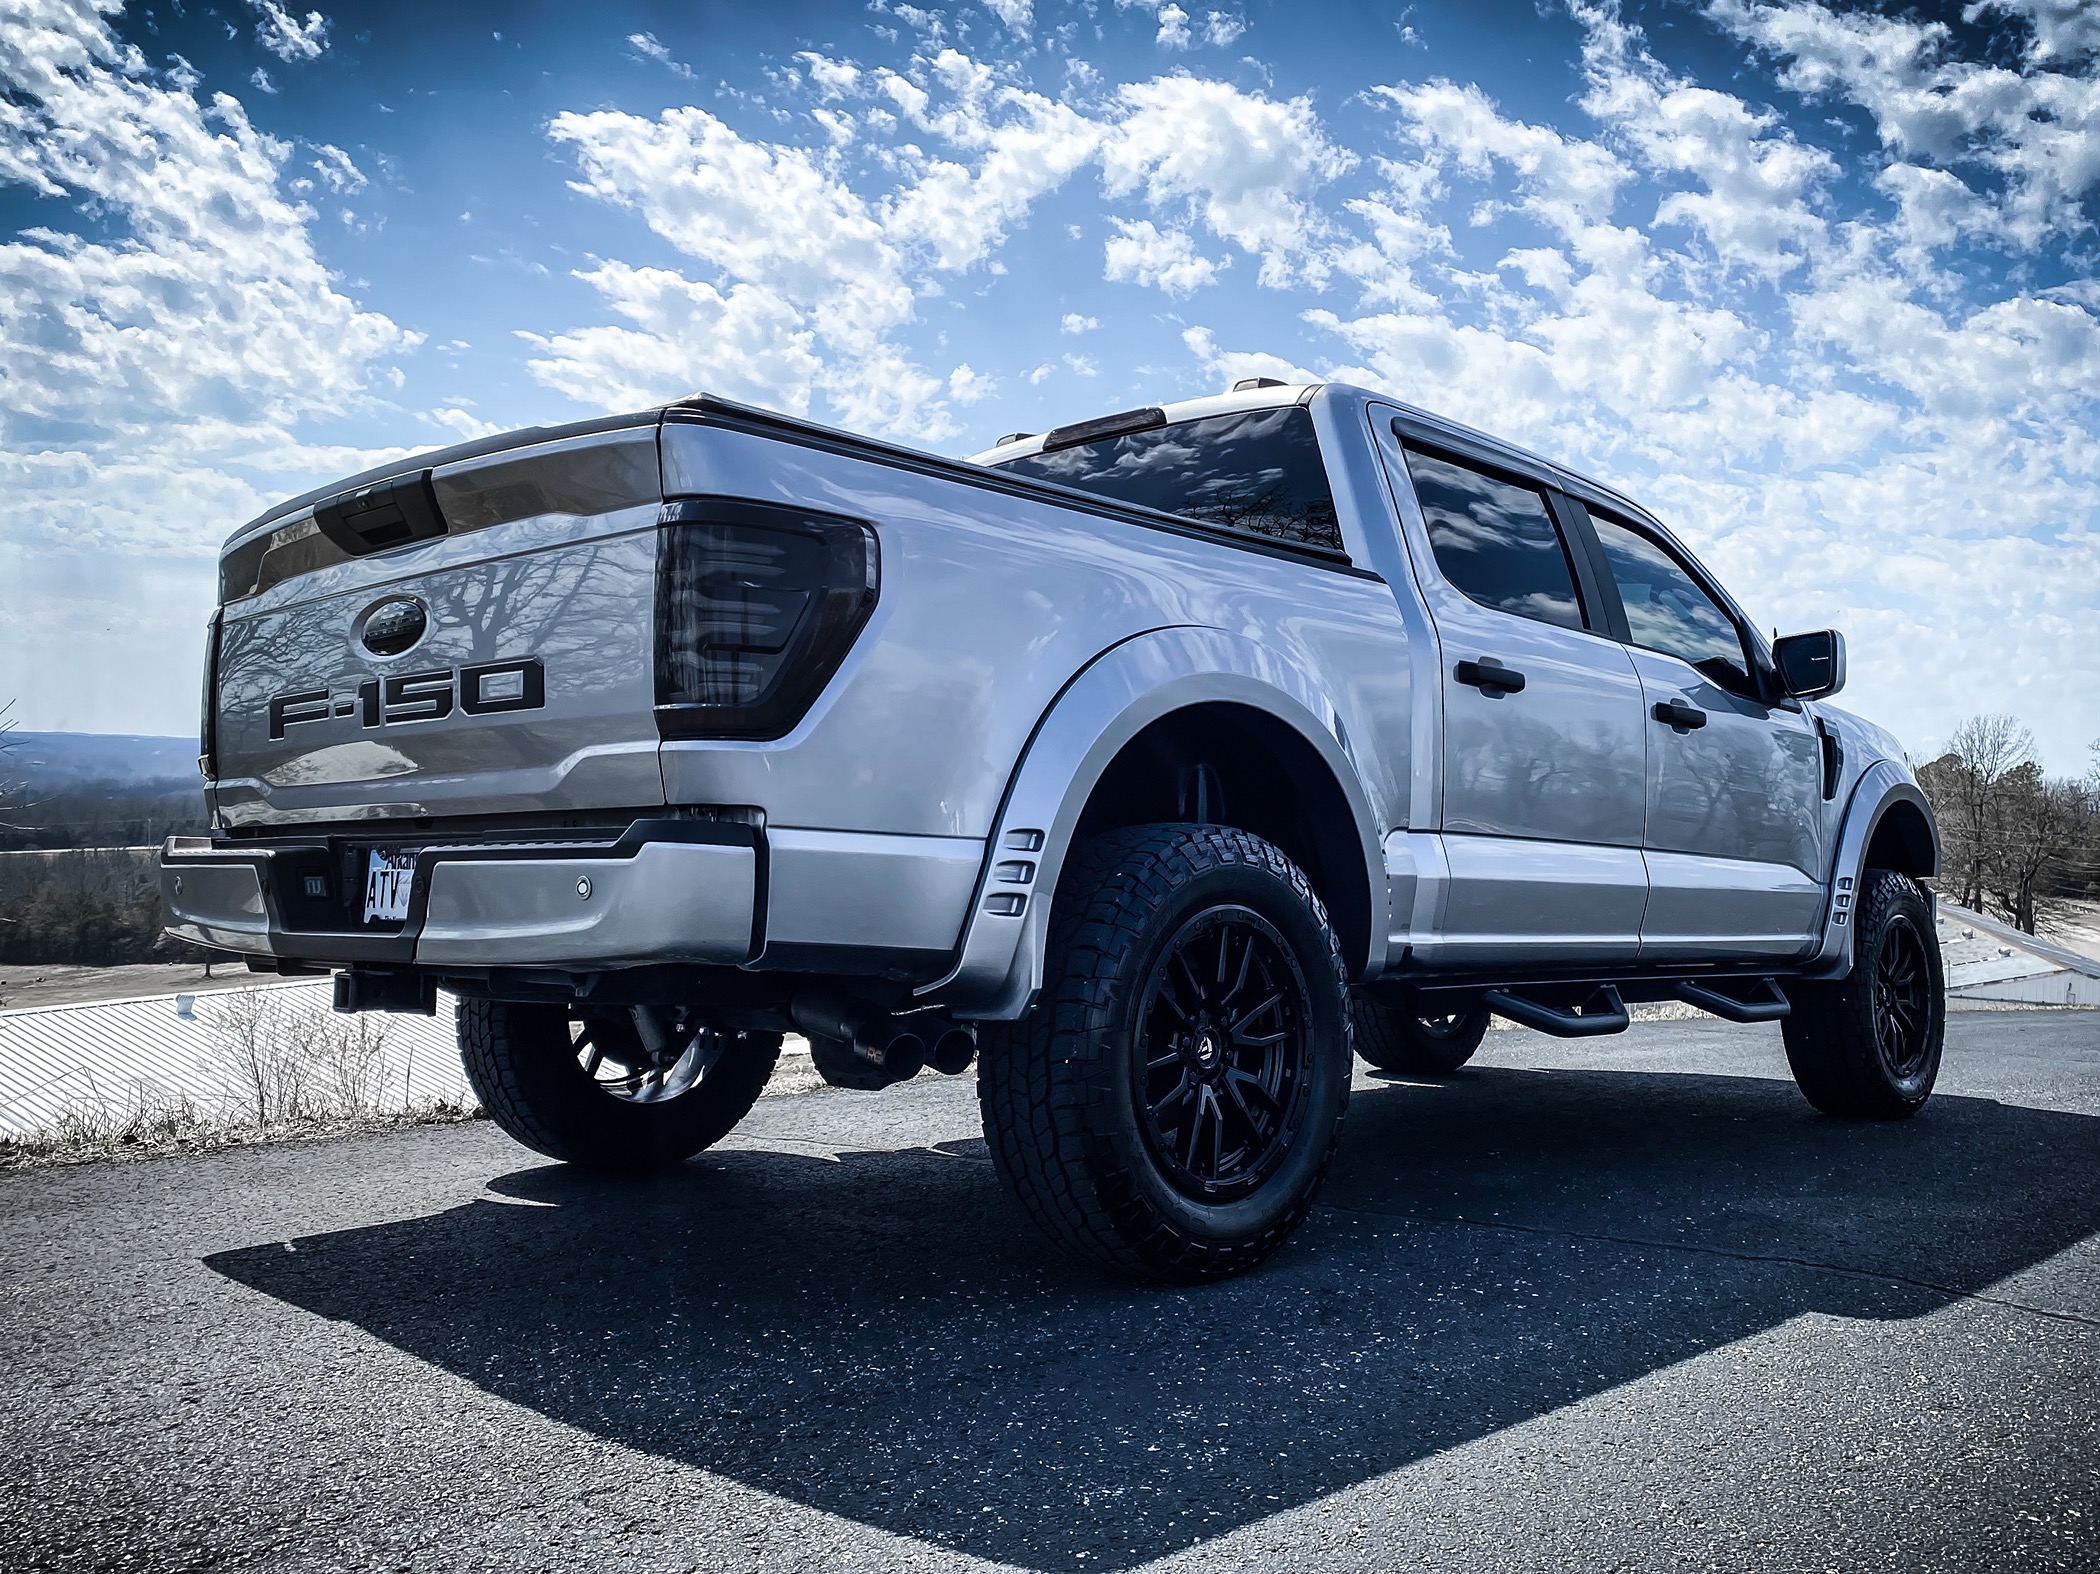 Ford F-150 Random F-150 Photos of the Day - Post Yours! 📸 🤳 IMG_5176_